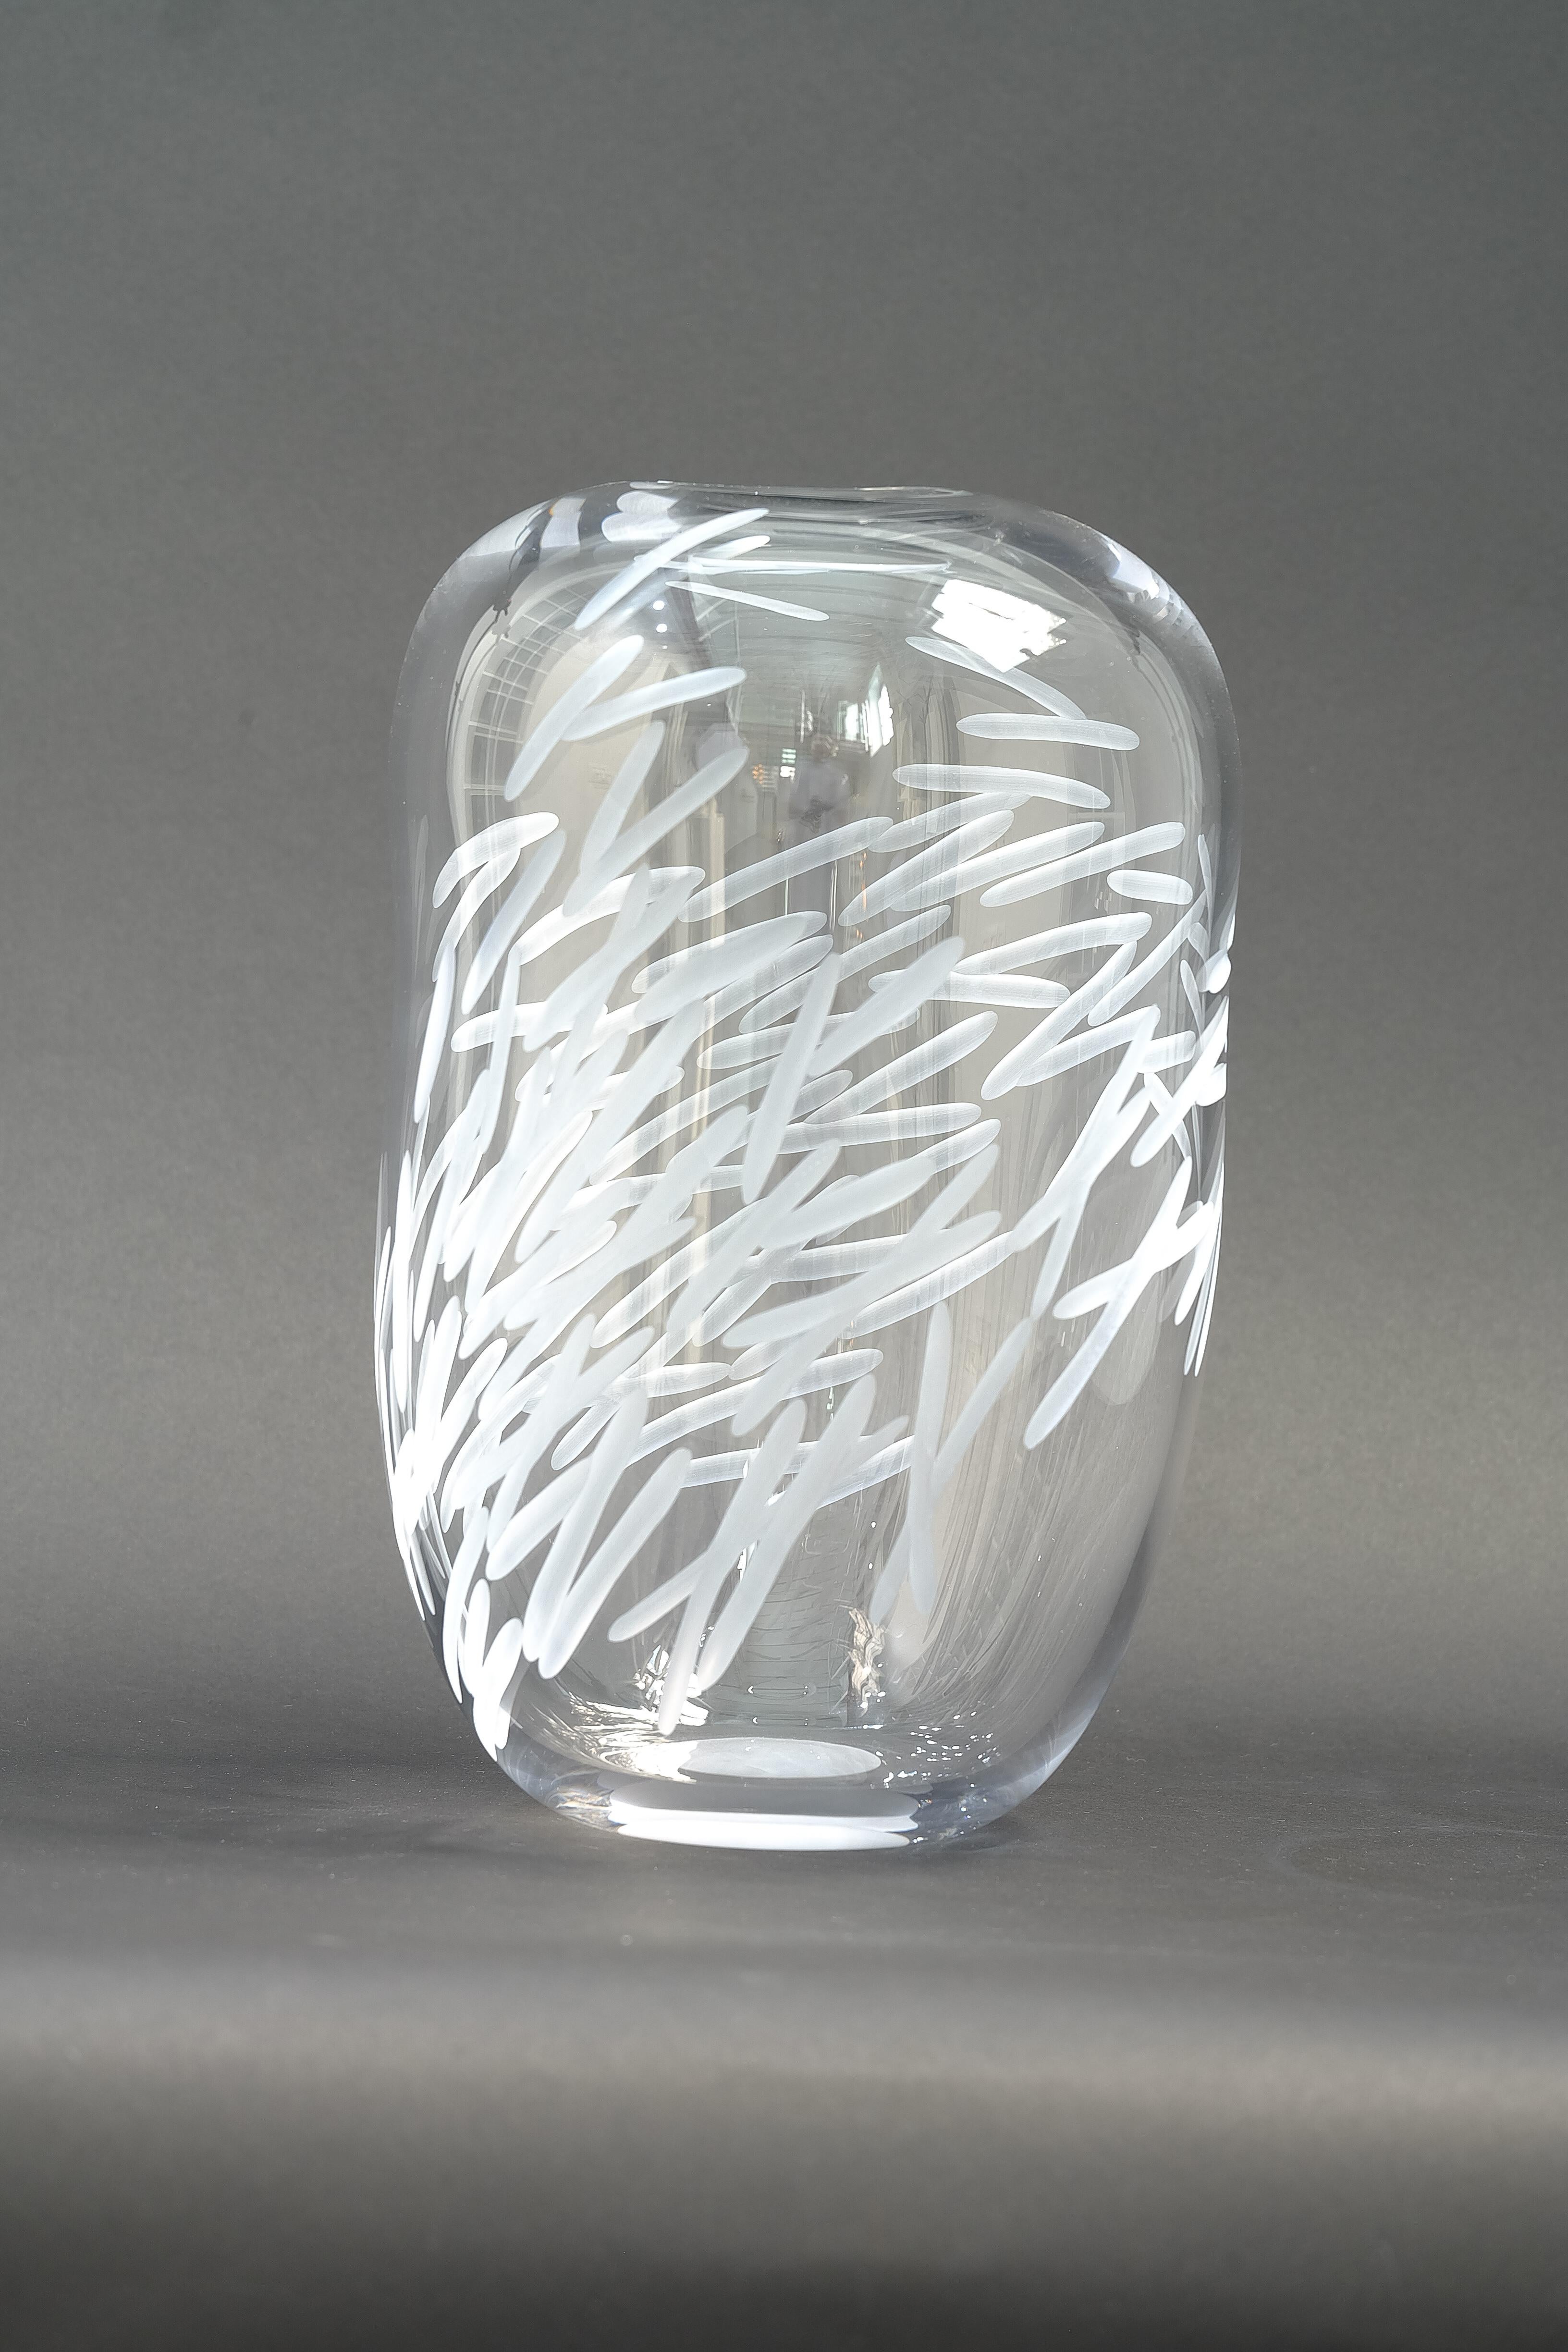 A clear glass vase blown and engraved by design duo Vezzini & Chen.

Vezzini & Chen’s work is defined by the artful marriage of hand carved ceramics and blown glass. The collections tread a fine line between functional and conceptual, with the